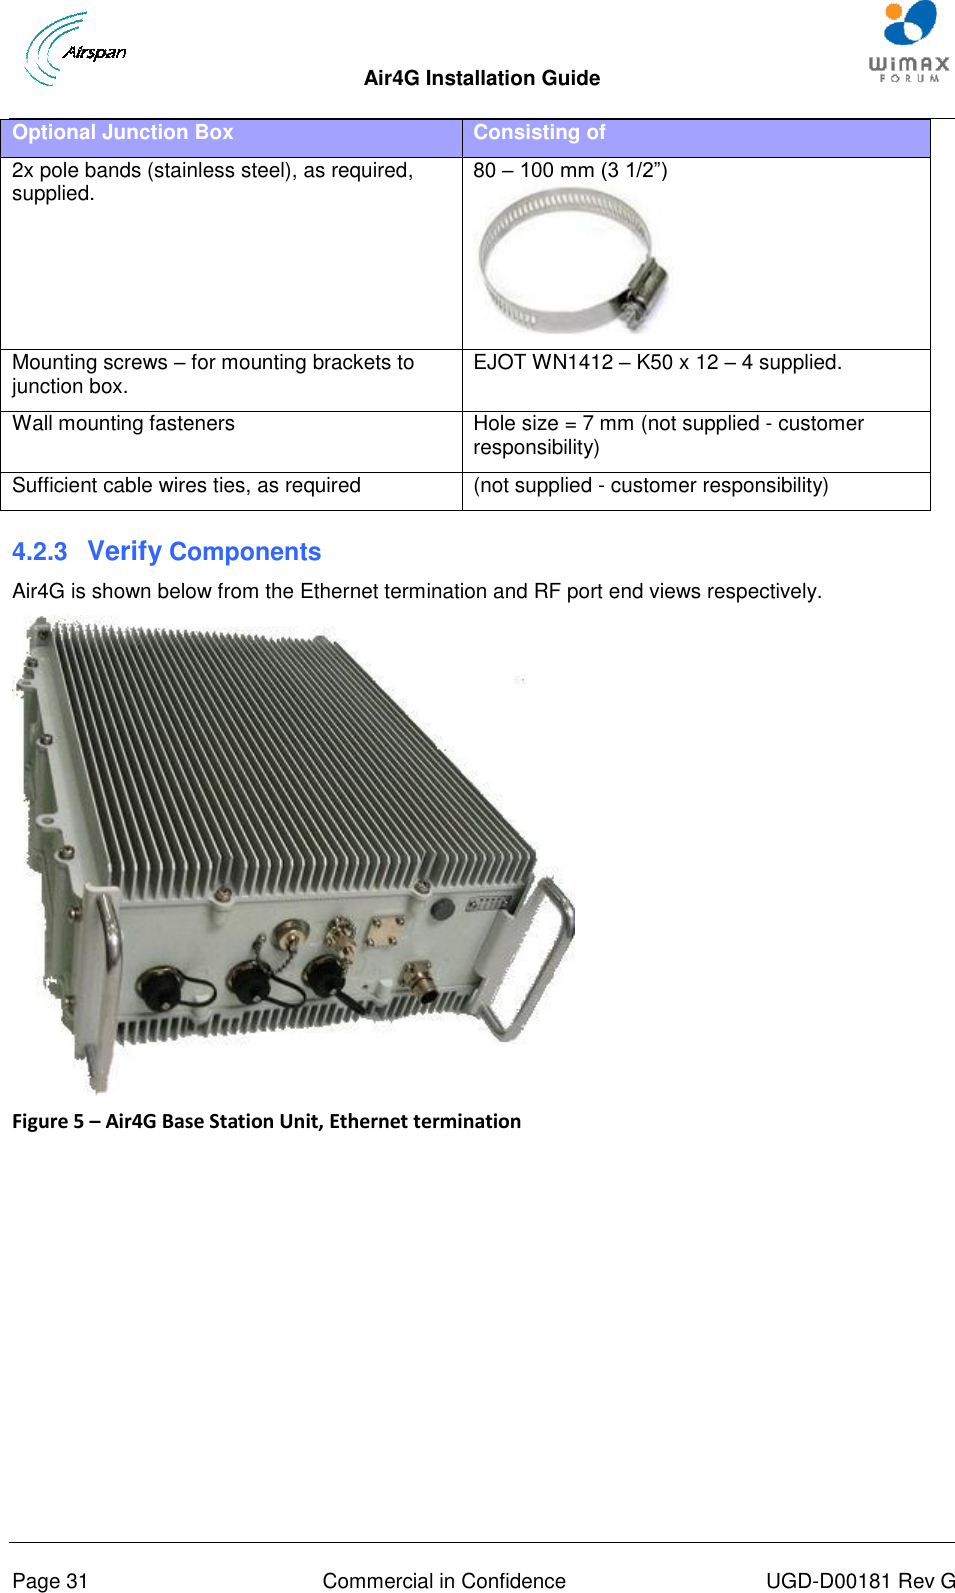  Air4G Installation Guide       Page 31  Commercial in Confidence  UGD-D00181 Rev G Optional Junction Box Consisting of 2x pole bands (stainless steel), as required, supplied. 80 – 100 mm (3 1/2”)  Mounting screws – for mounting brackets to junction box. EJOT WN1412 – K50 x 12 – 4 supplied. Wall mounting fasteners  Hole size = 7 mm (not supplied - customer responsibility) Sufficient cable wires ties, as required (not supplied - customer responsibility) 4.2.3  Verify Components Air4G is shown below from the Ethernet termination and RF port end views respectively.  Figure 5 – Air4G Base Station Unit, Ethernet termination  